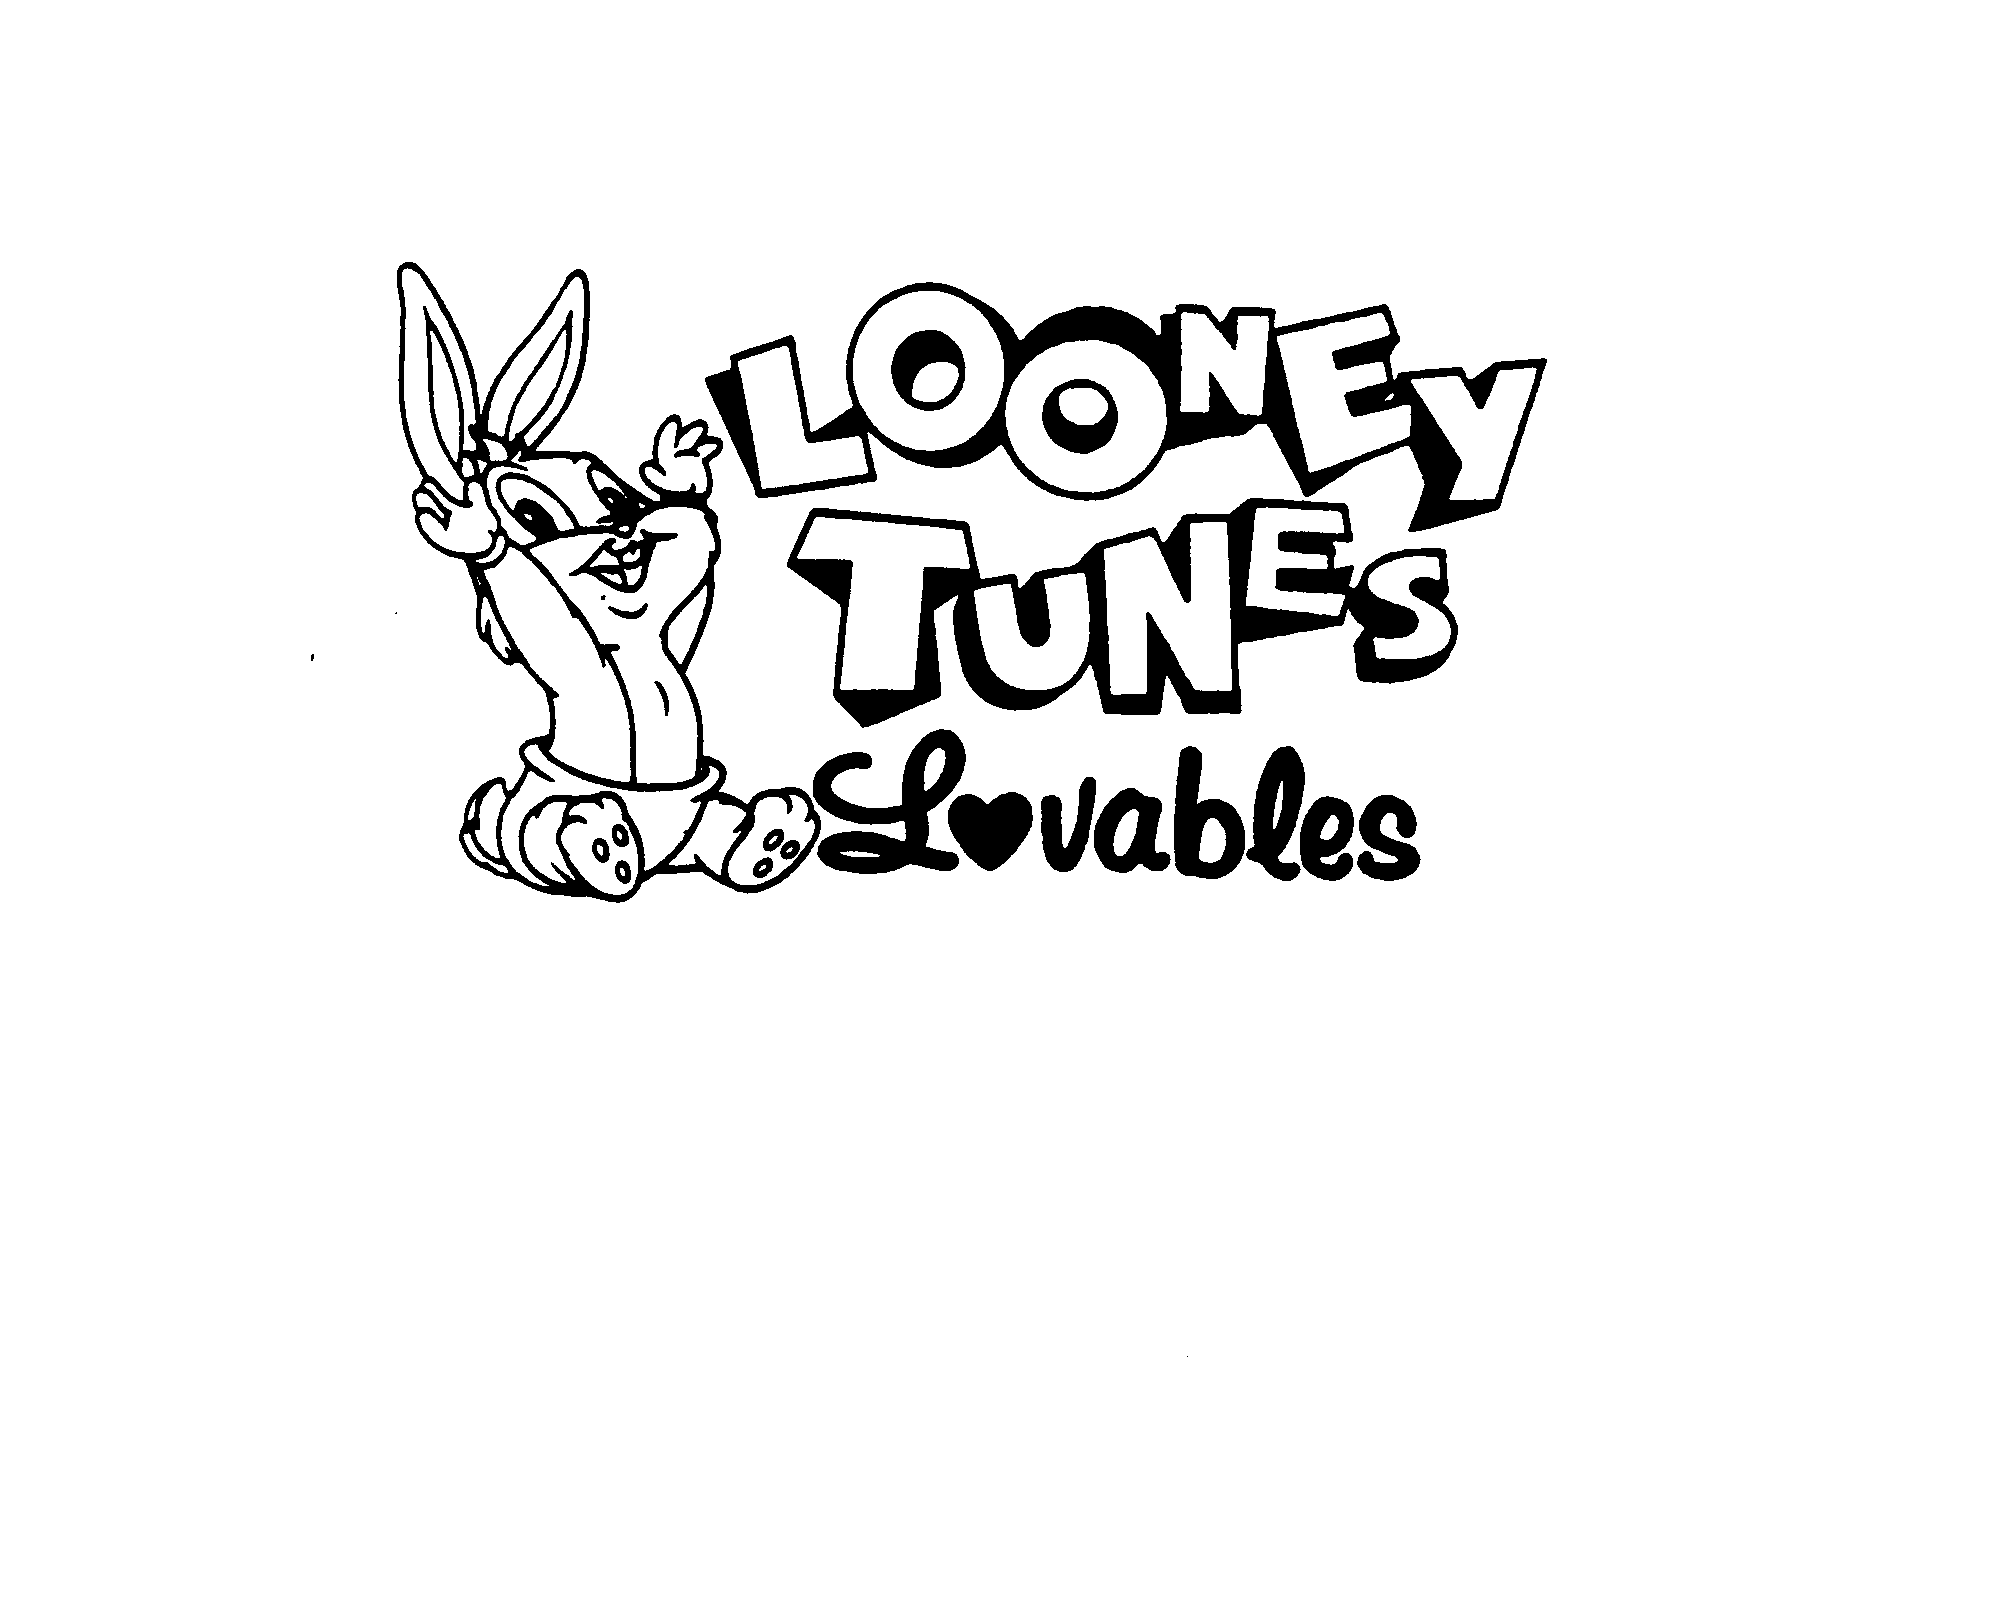  LOONEY TUNES LOVABLES